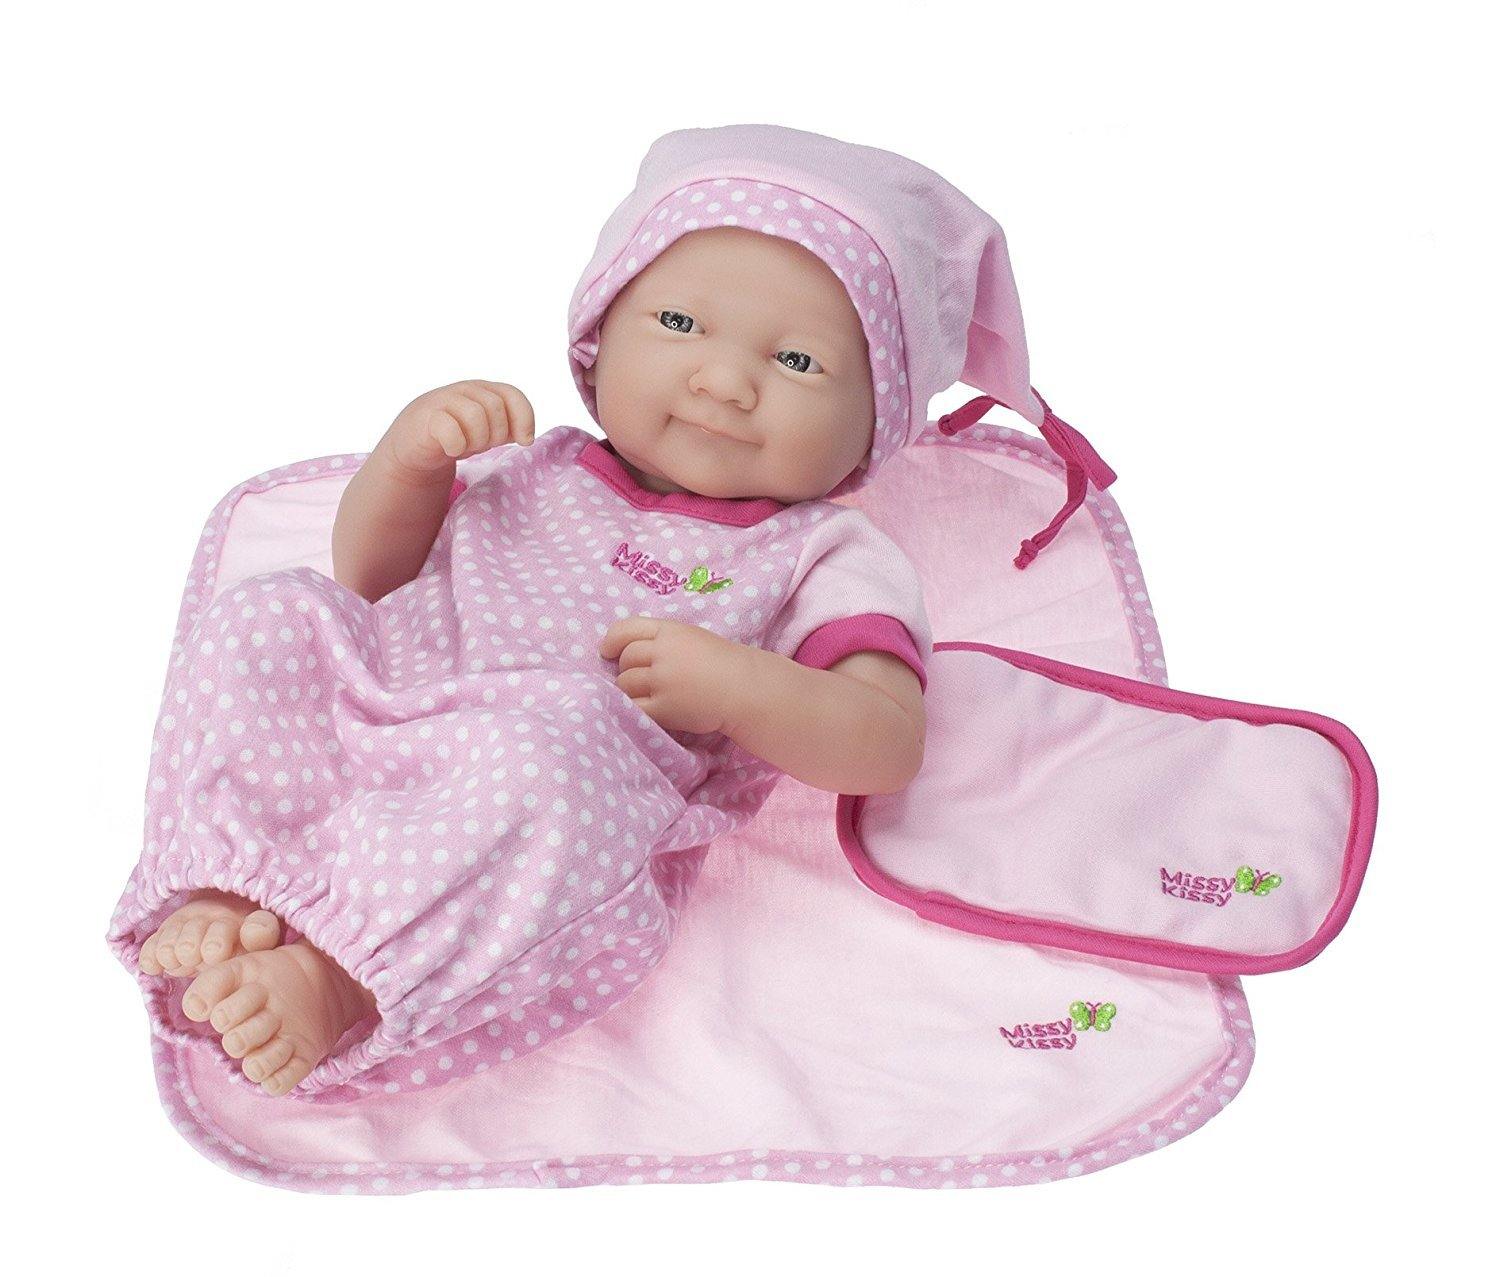 For Keeps! Clothing for 15" Dolls - Special Bedtime Set - JC Toys Group Inc.